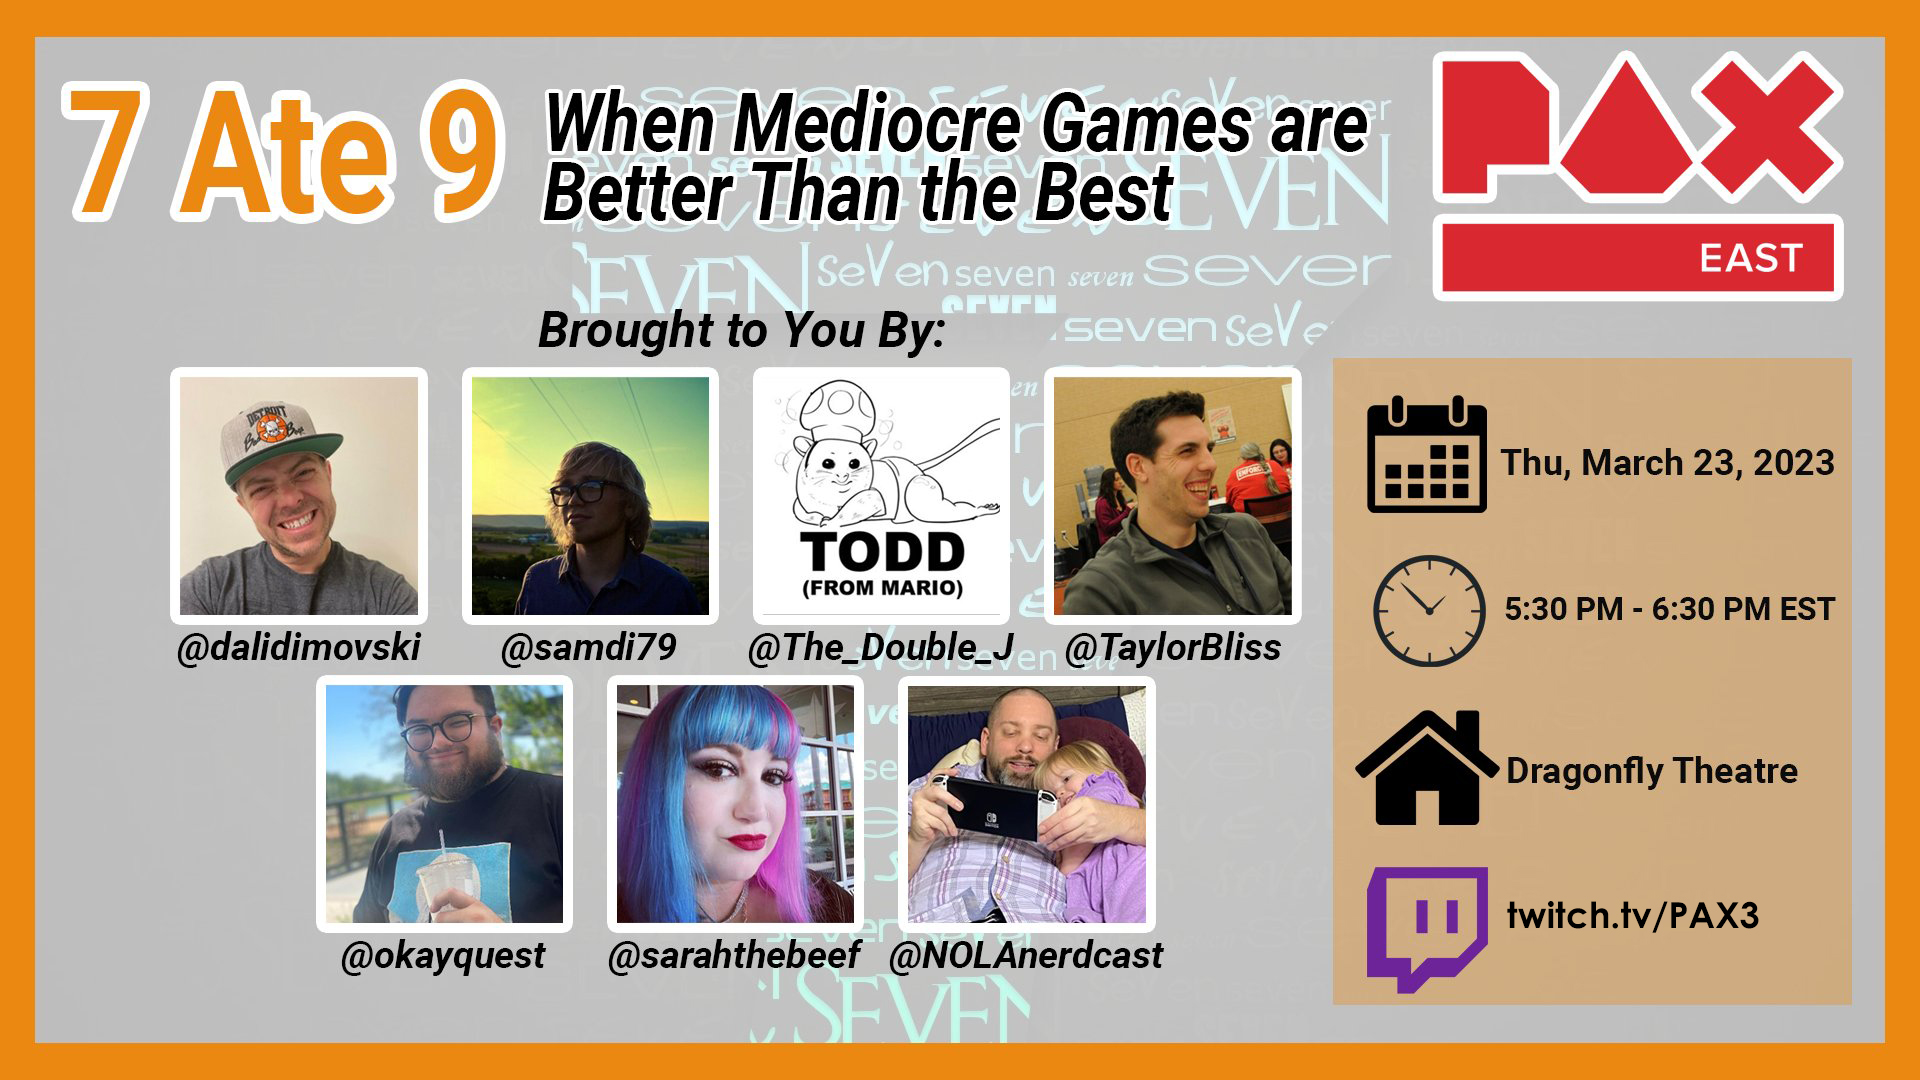 Watch our “7 Ate 9: When Mediocre Games are Better Than the Best” panel from PAX East 2023